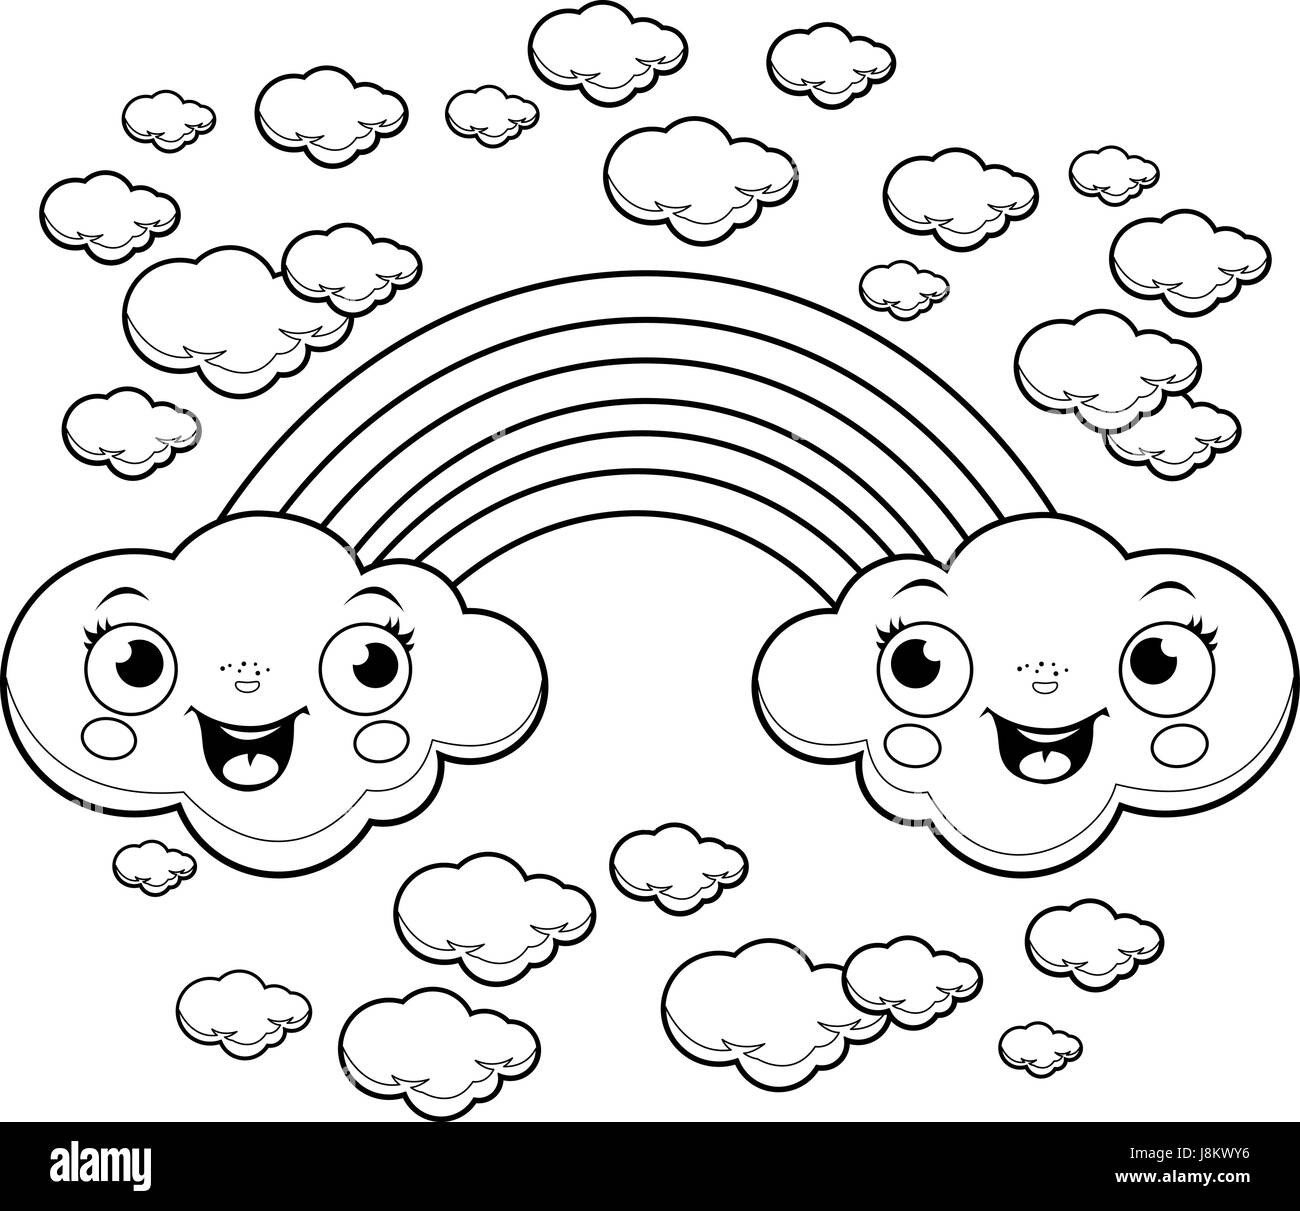 Rainbow cloud characters coloring page Stock Vector